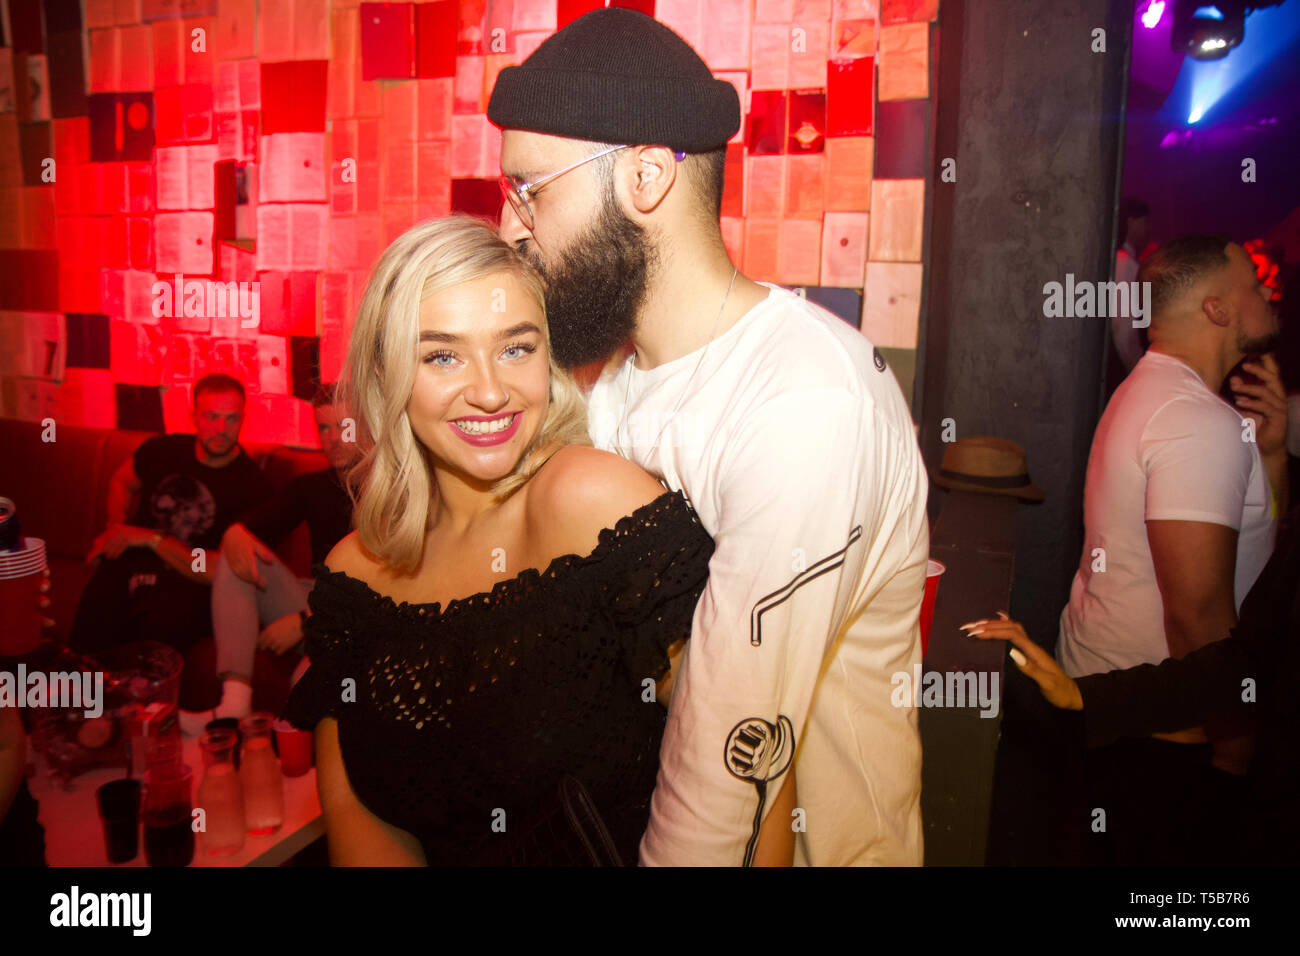 EXCLUSIVE Rak Su Star Mustafa Rahimtulla with new girlfriend Livvy Allenby. The X-Factor winner enjoyed a Easter Bank Holiday night out with stunning lash technician Livvy showing her off to friends at Jam Events exclusive high end event Sunday Jam held at nightspot Twisted Monkey in Watford. The couple were seen kissing and cuddling with Mus playfully grabbing and bending down to bite her bum. They hung out in the VIP area all night. This is the first time Mus has been seen out with a girlfriend since winning X Factor in 2017 and almost two years since his split from his ex girlfriend. Stock Photo